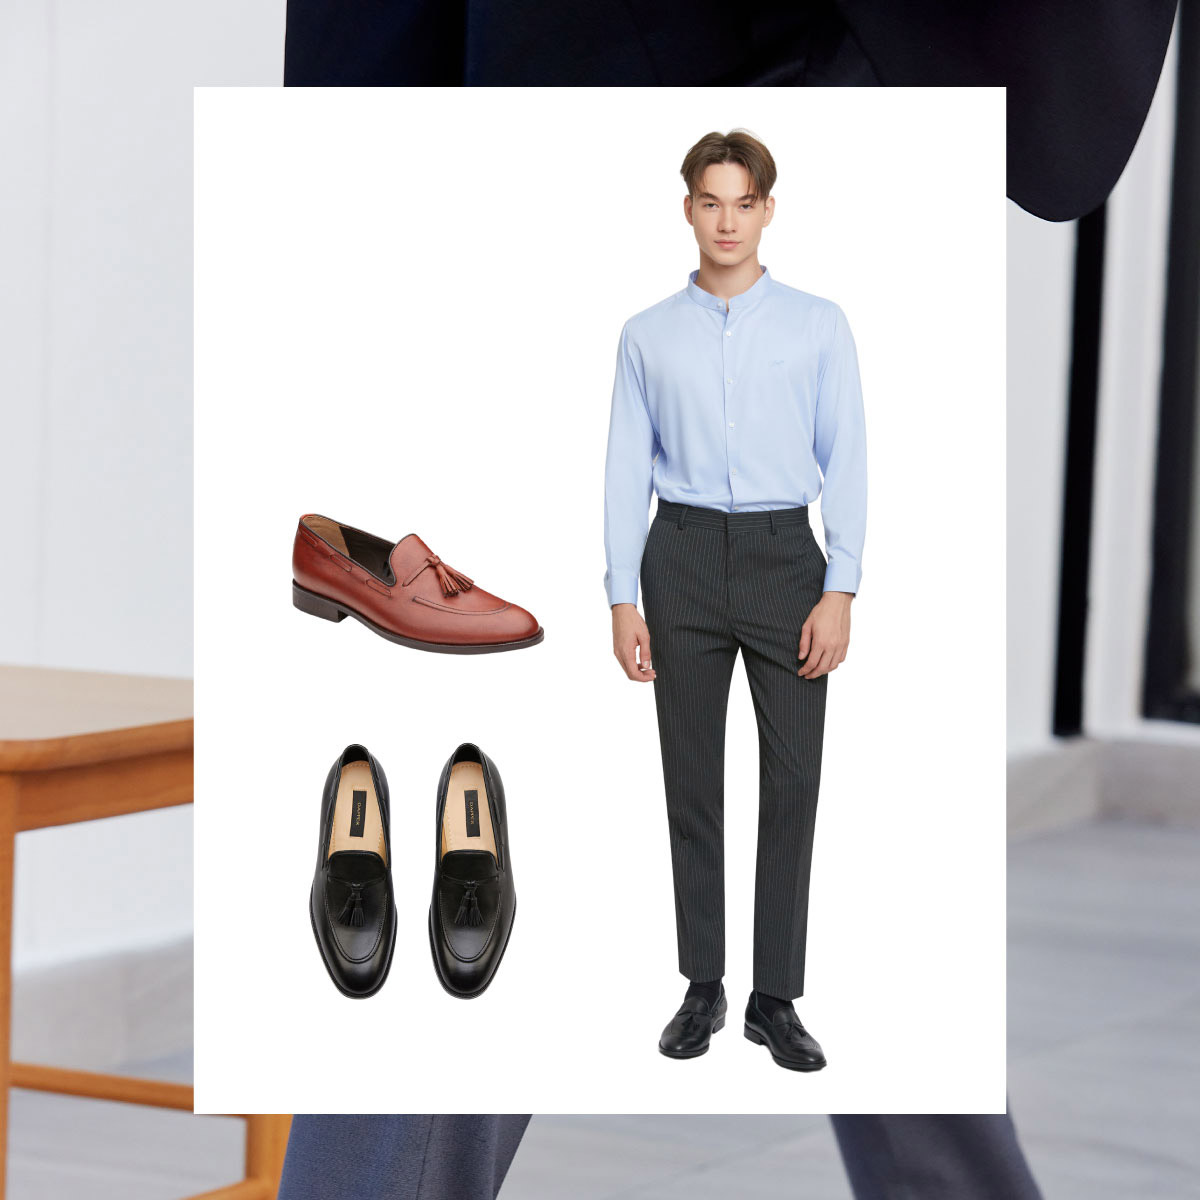 Stylish Outfit with Loafers, DAPPER | Style, Like No Others!